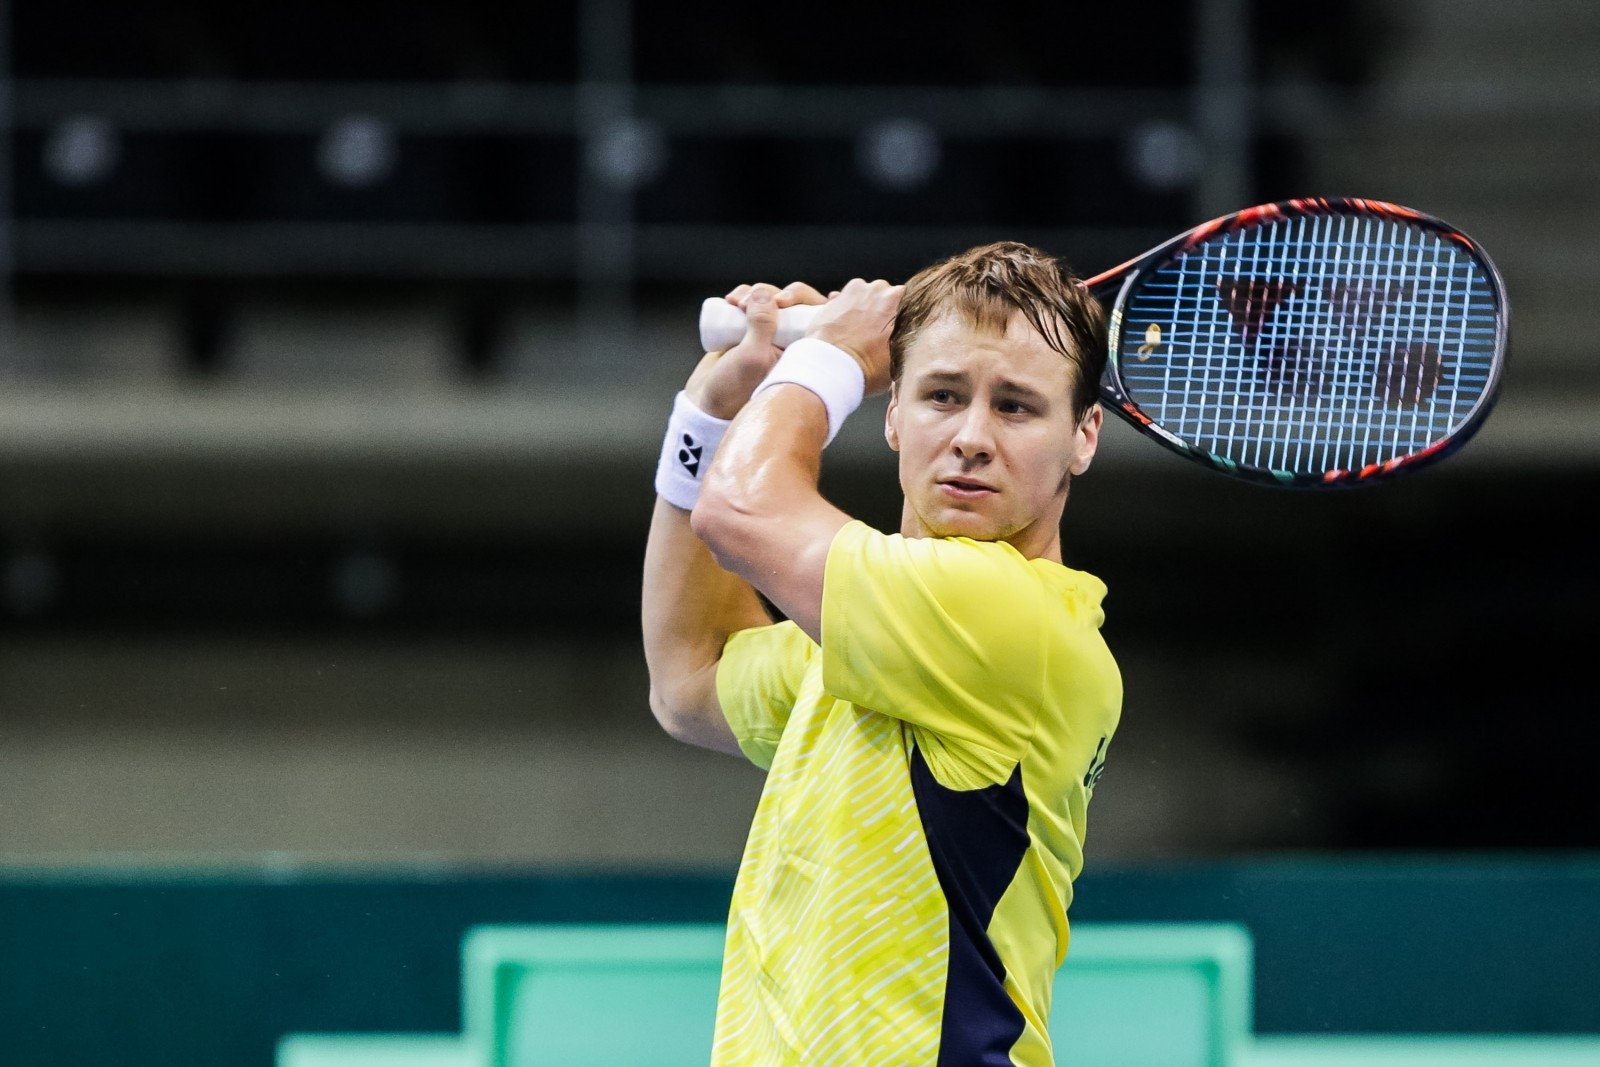 Overview Melodic token Lithuanian tennis player Berankis qualifies for Olympics - EN.DELFI